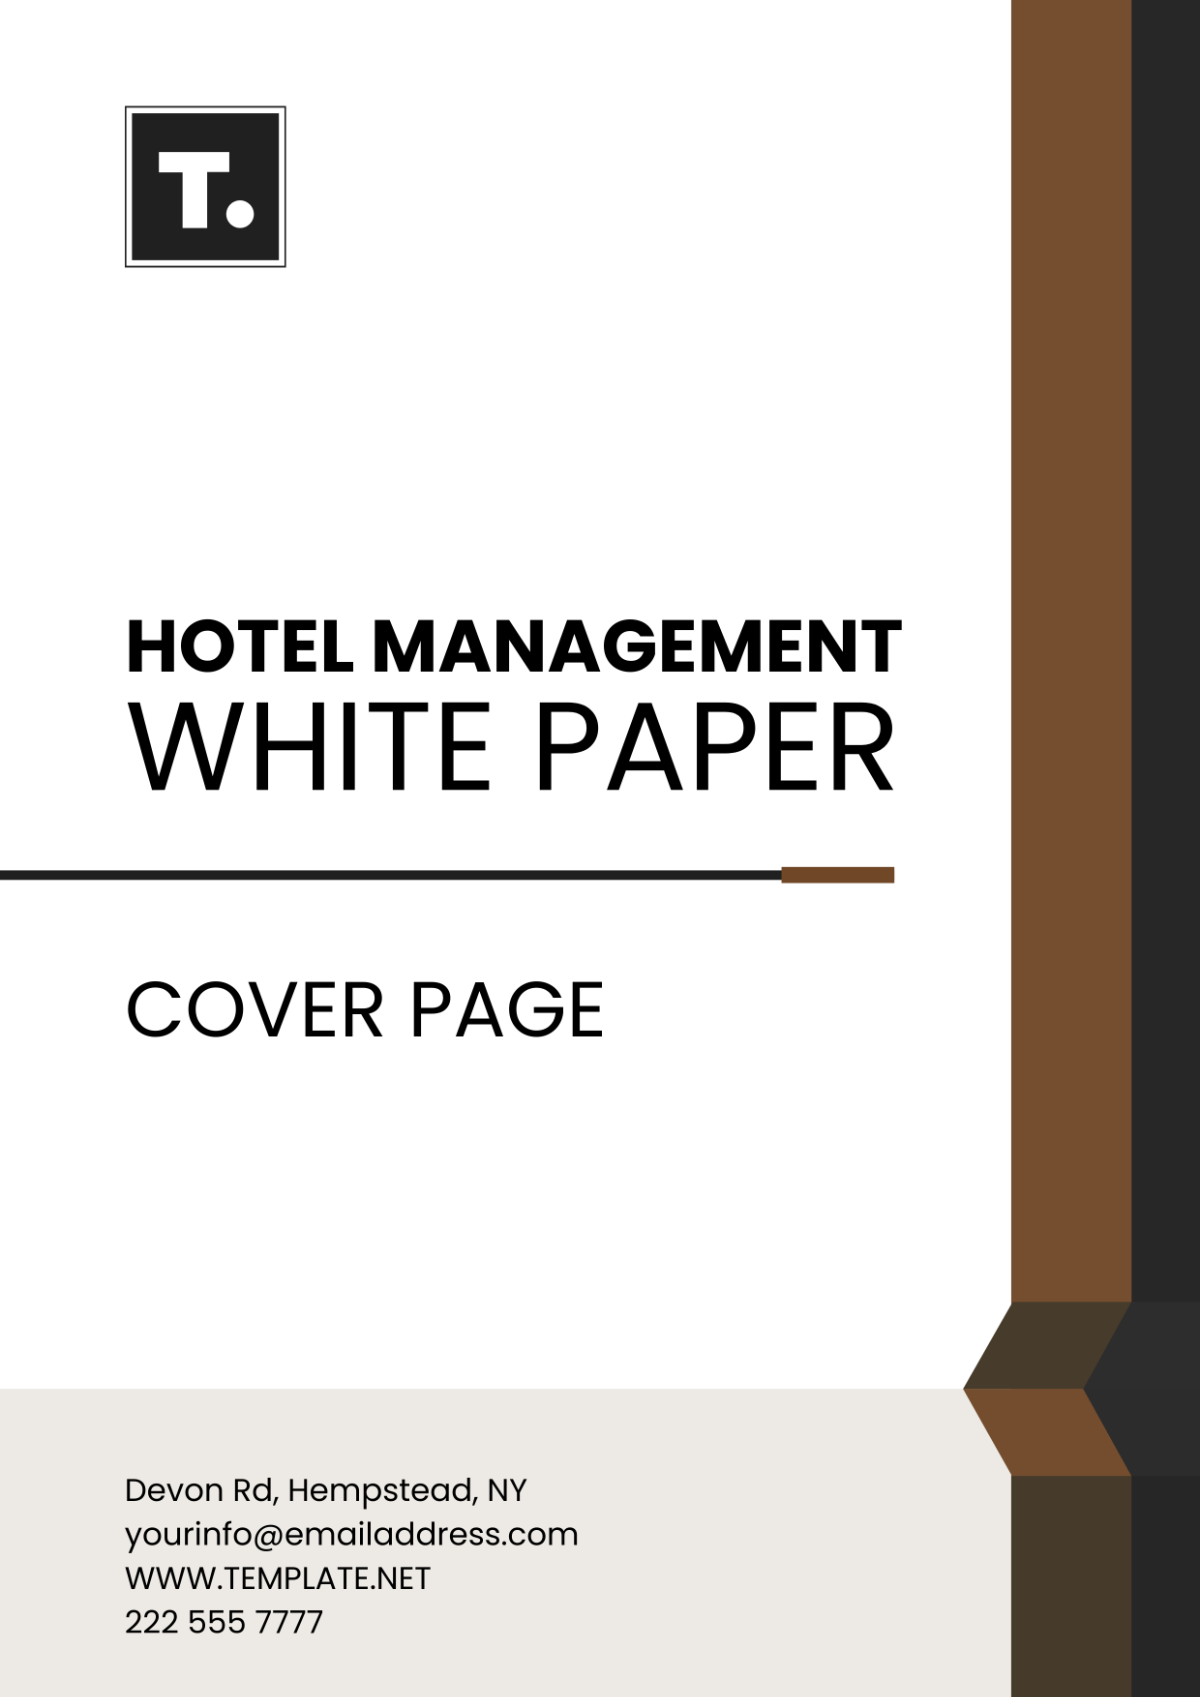 Hotel Management White Paper Cover Page